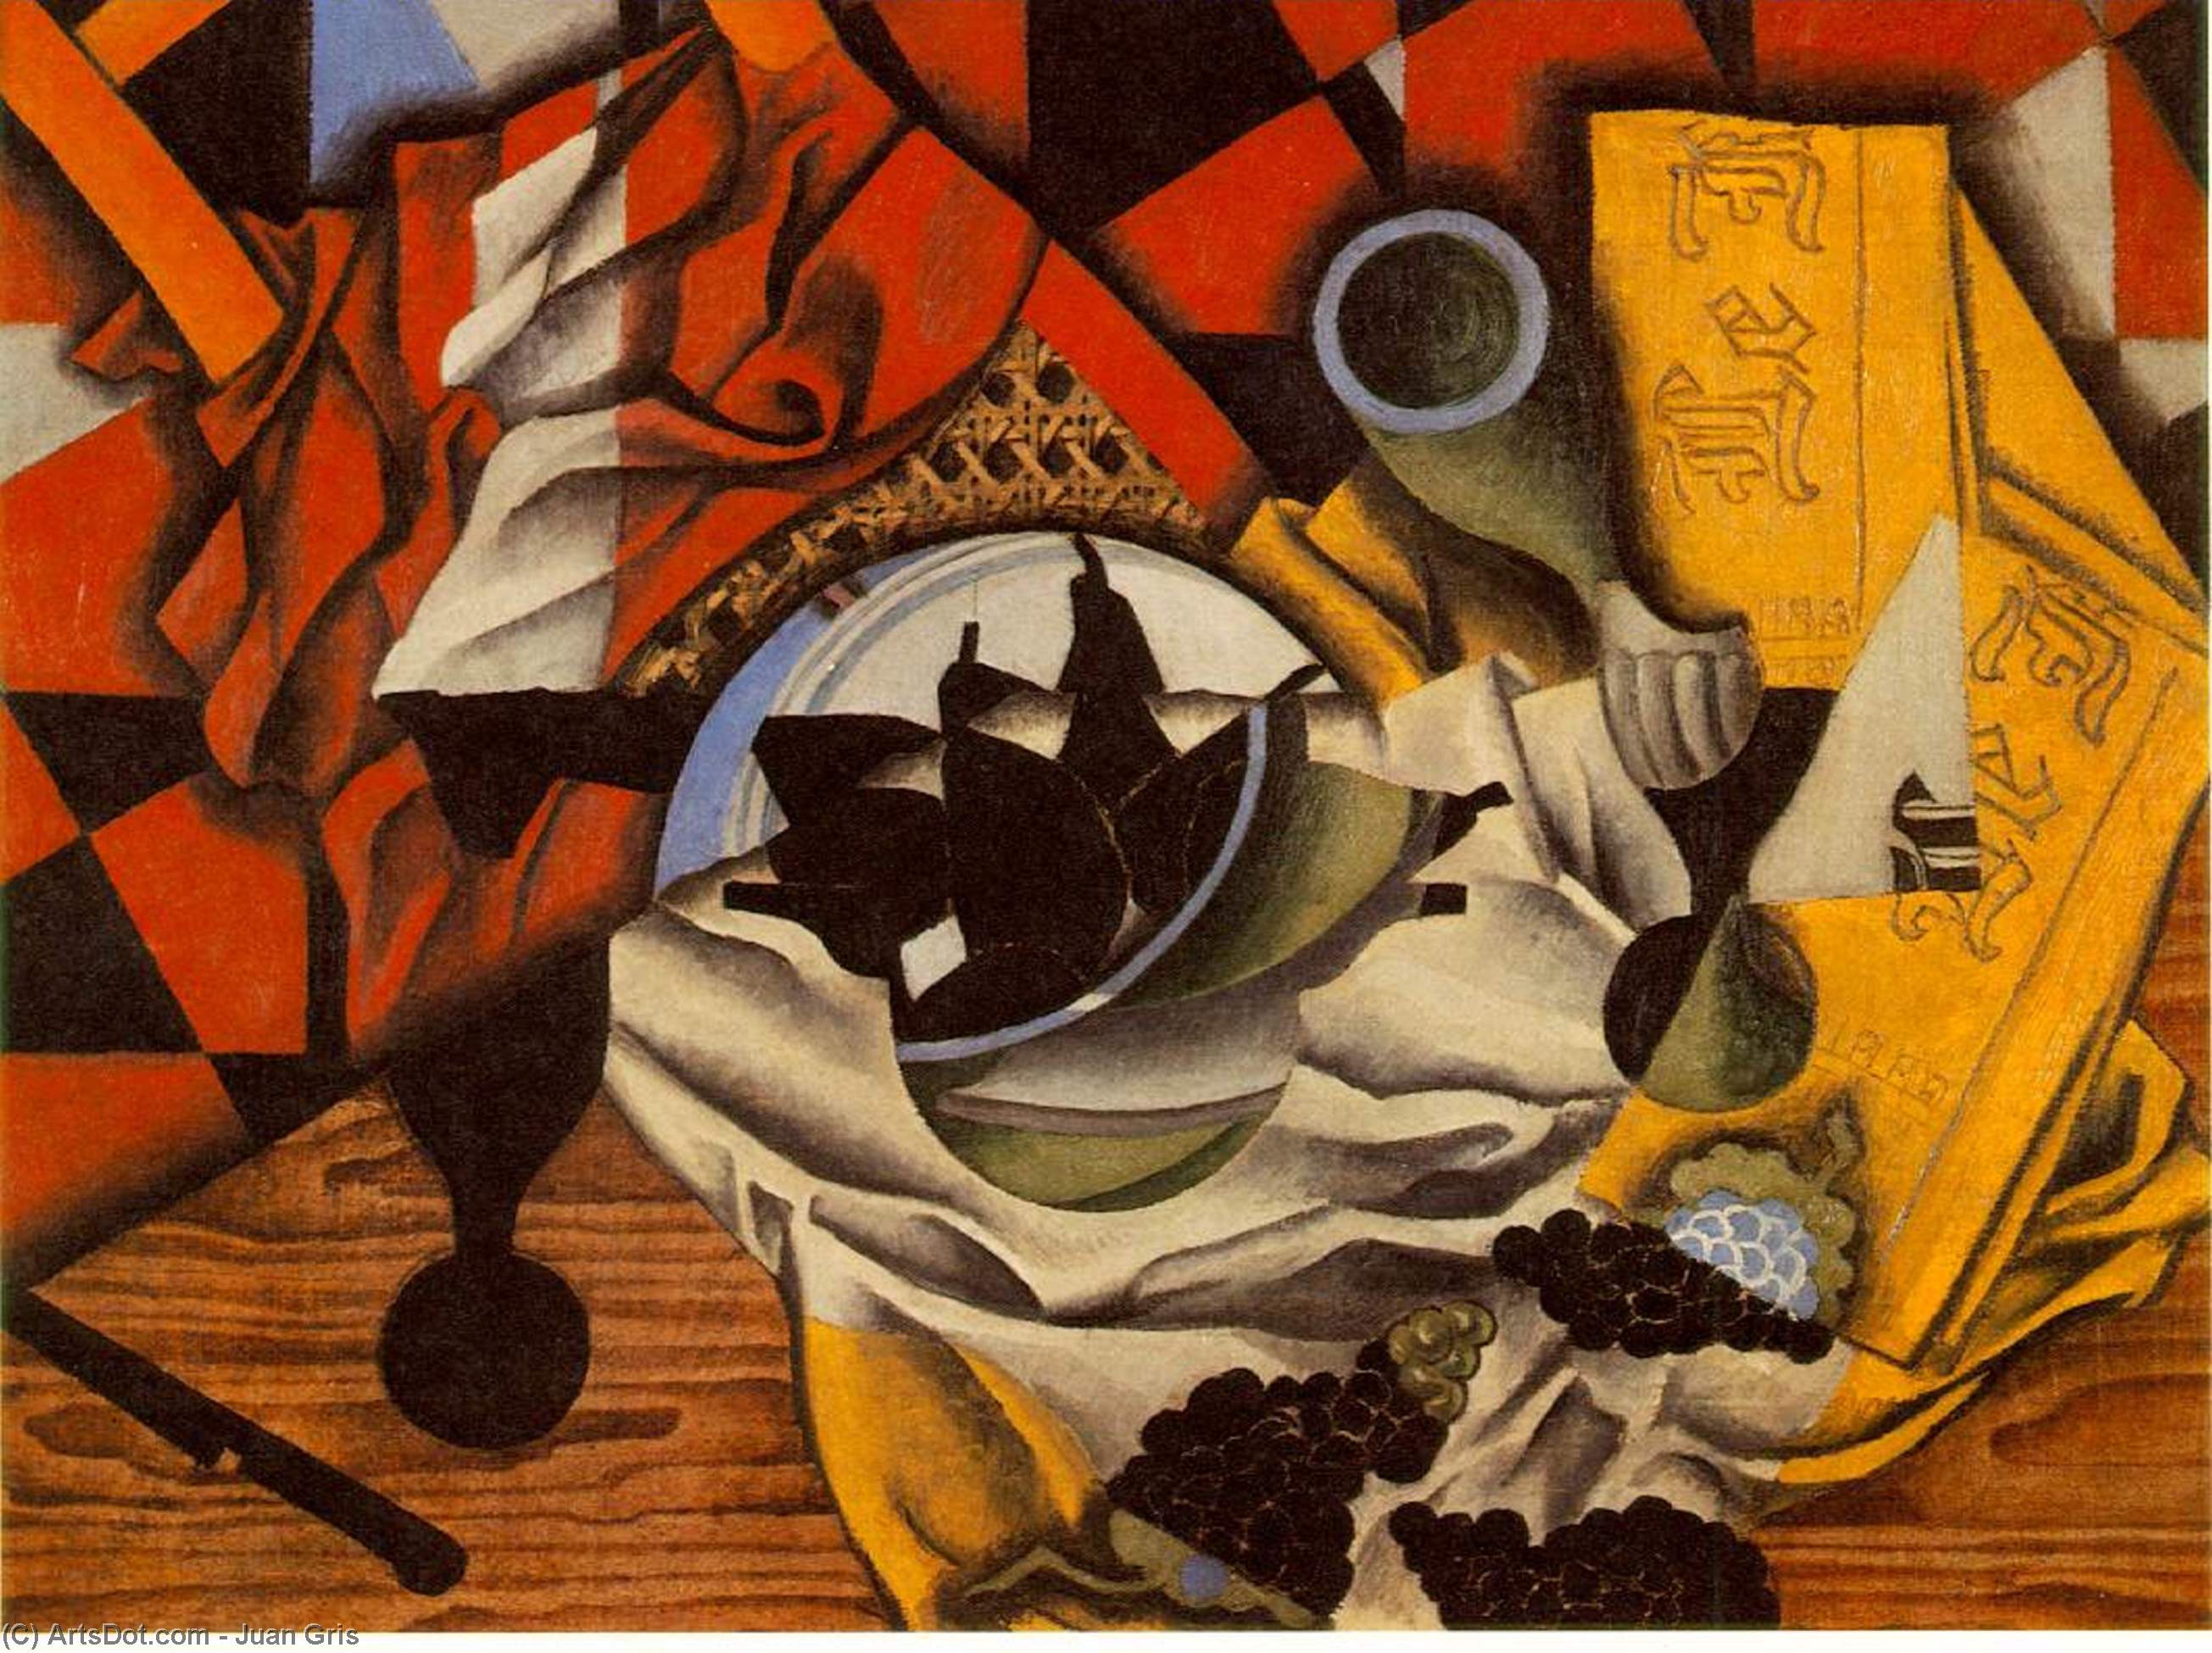 WikiOO.org - Encyclopedia of Fine Arts - Malba, Artwork Juan Gris - Pears and grapes on a table